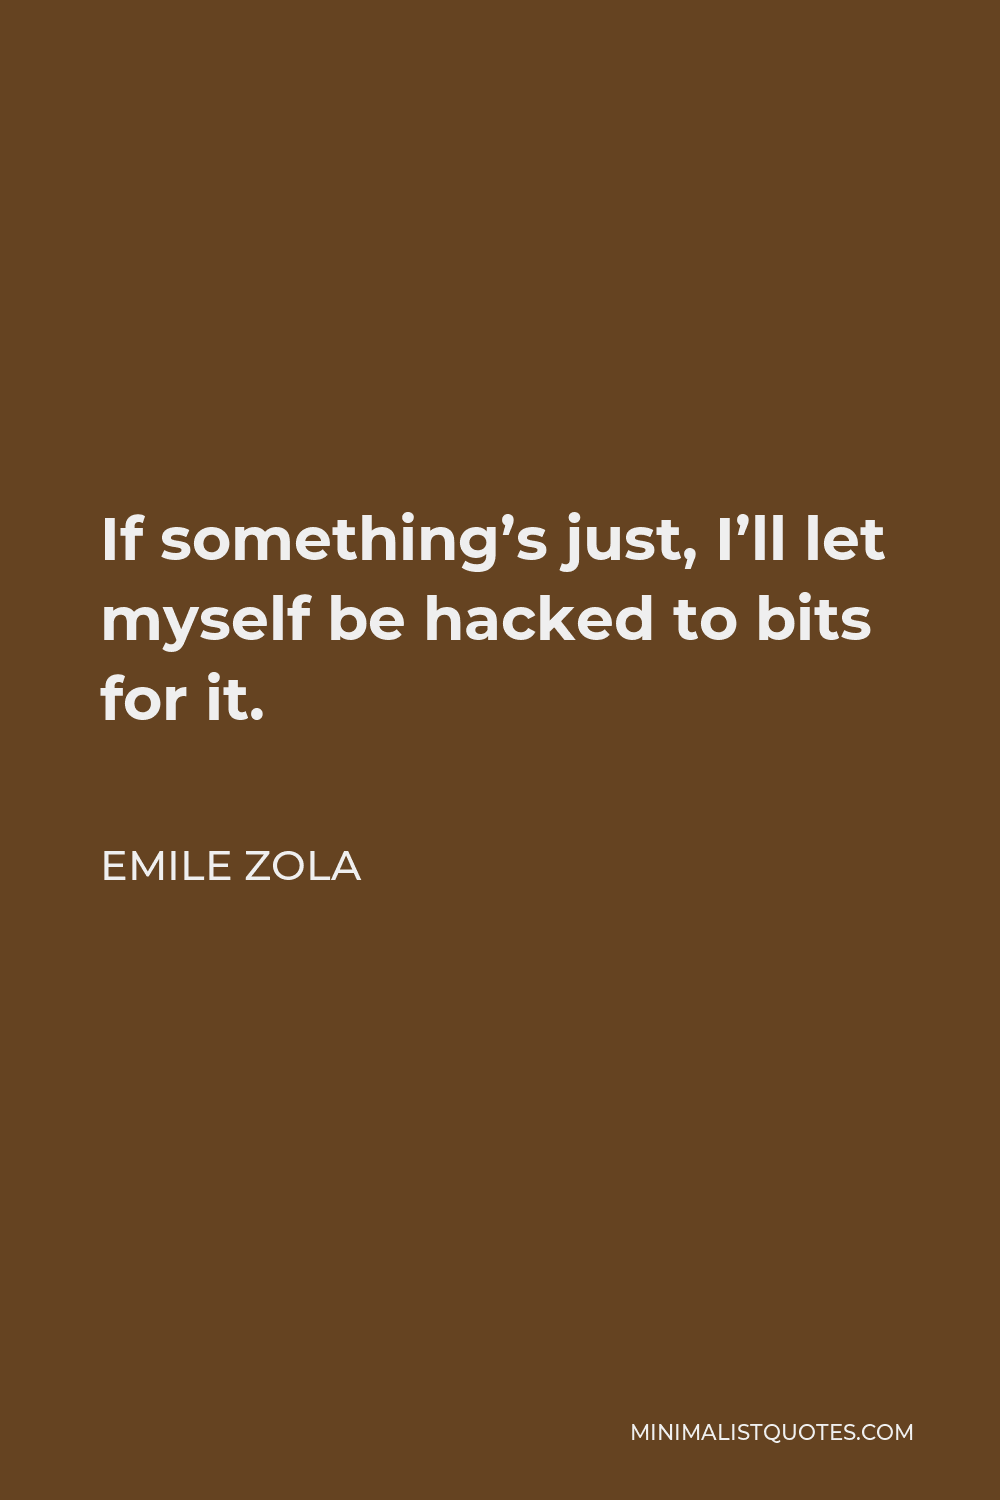 Emile Zola Quote - If something’s just, I’ll let myself be hacked to bits for it.